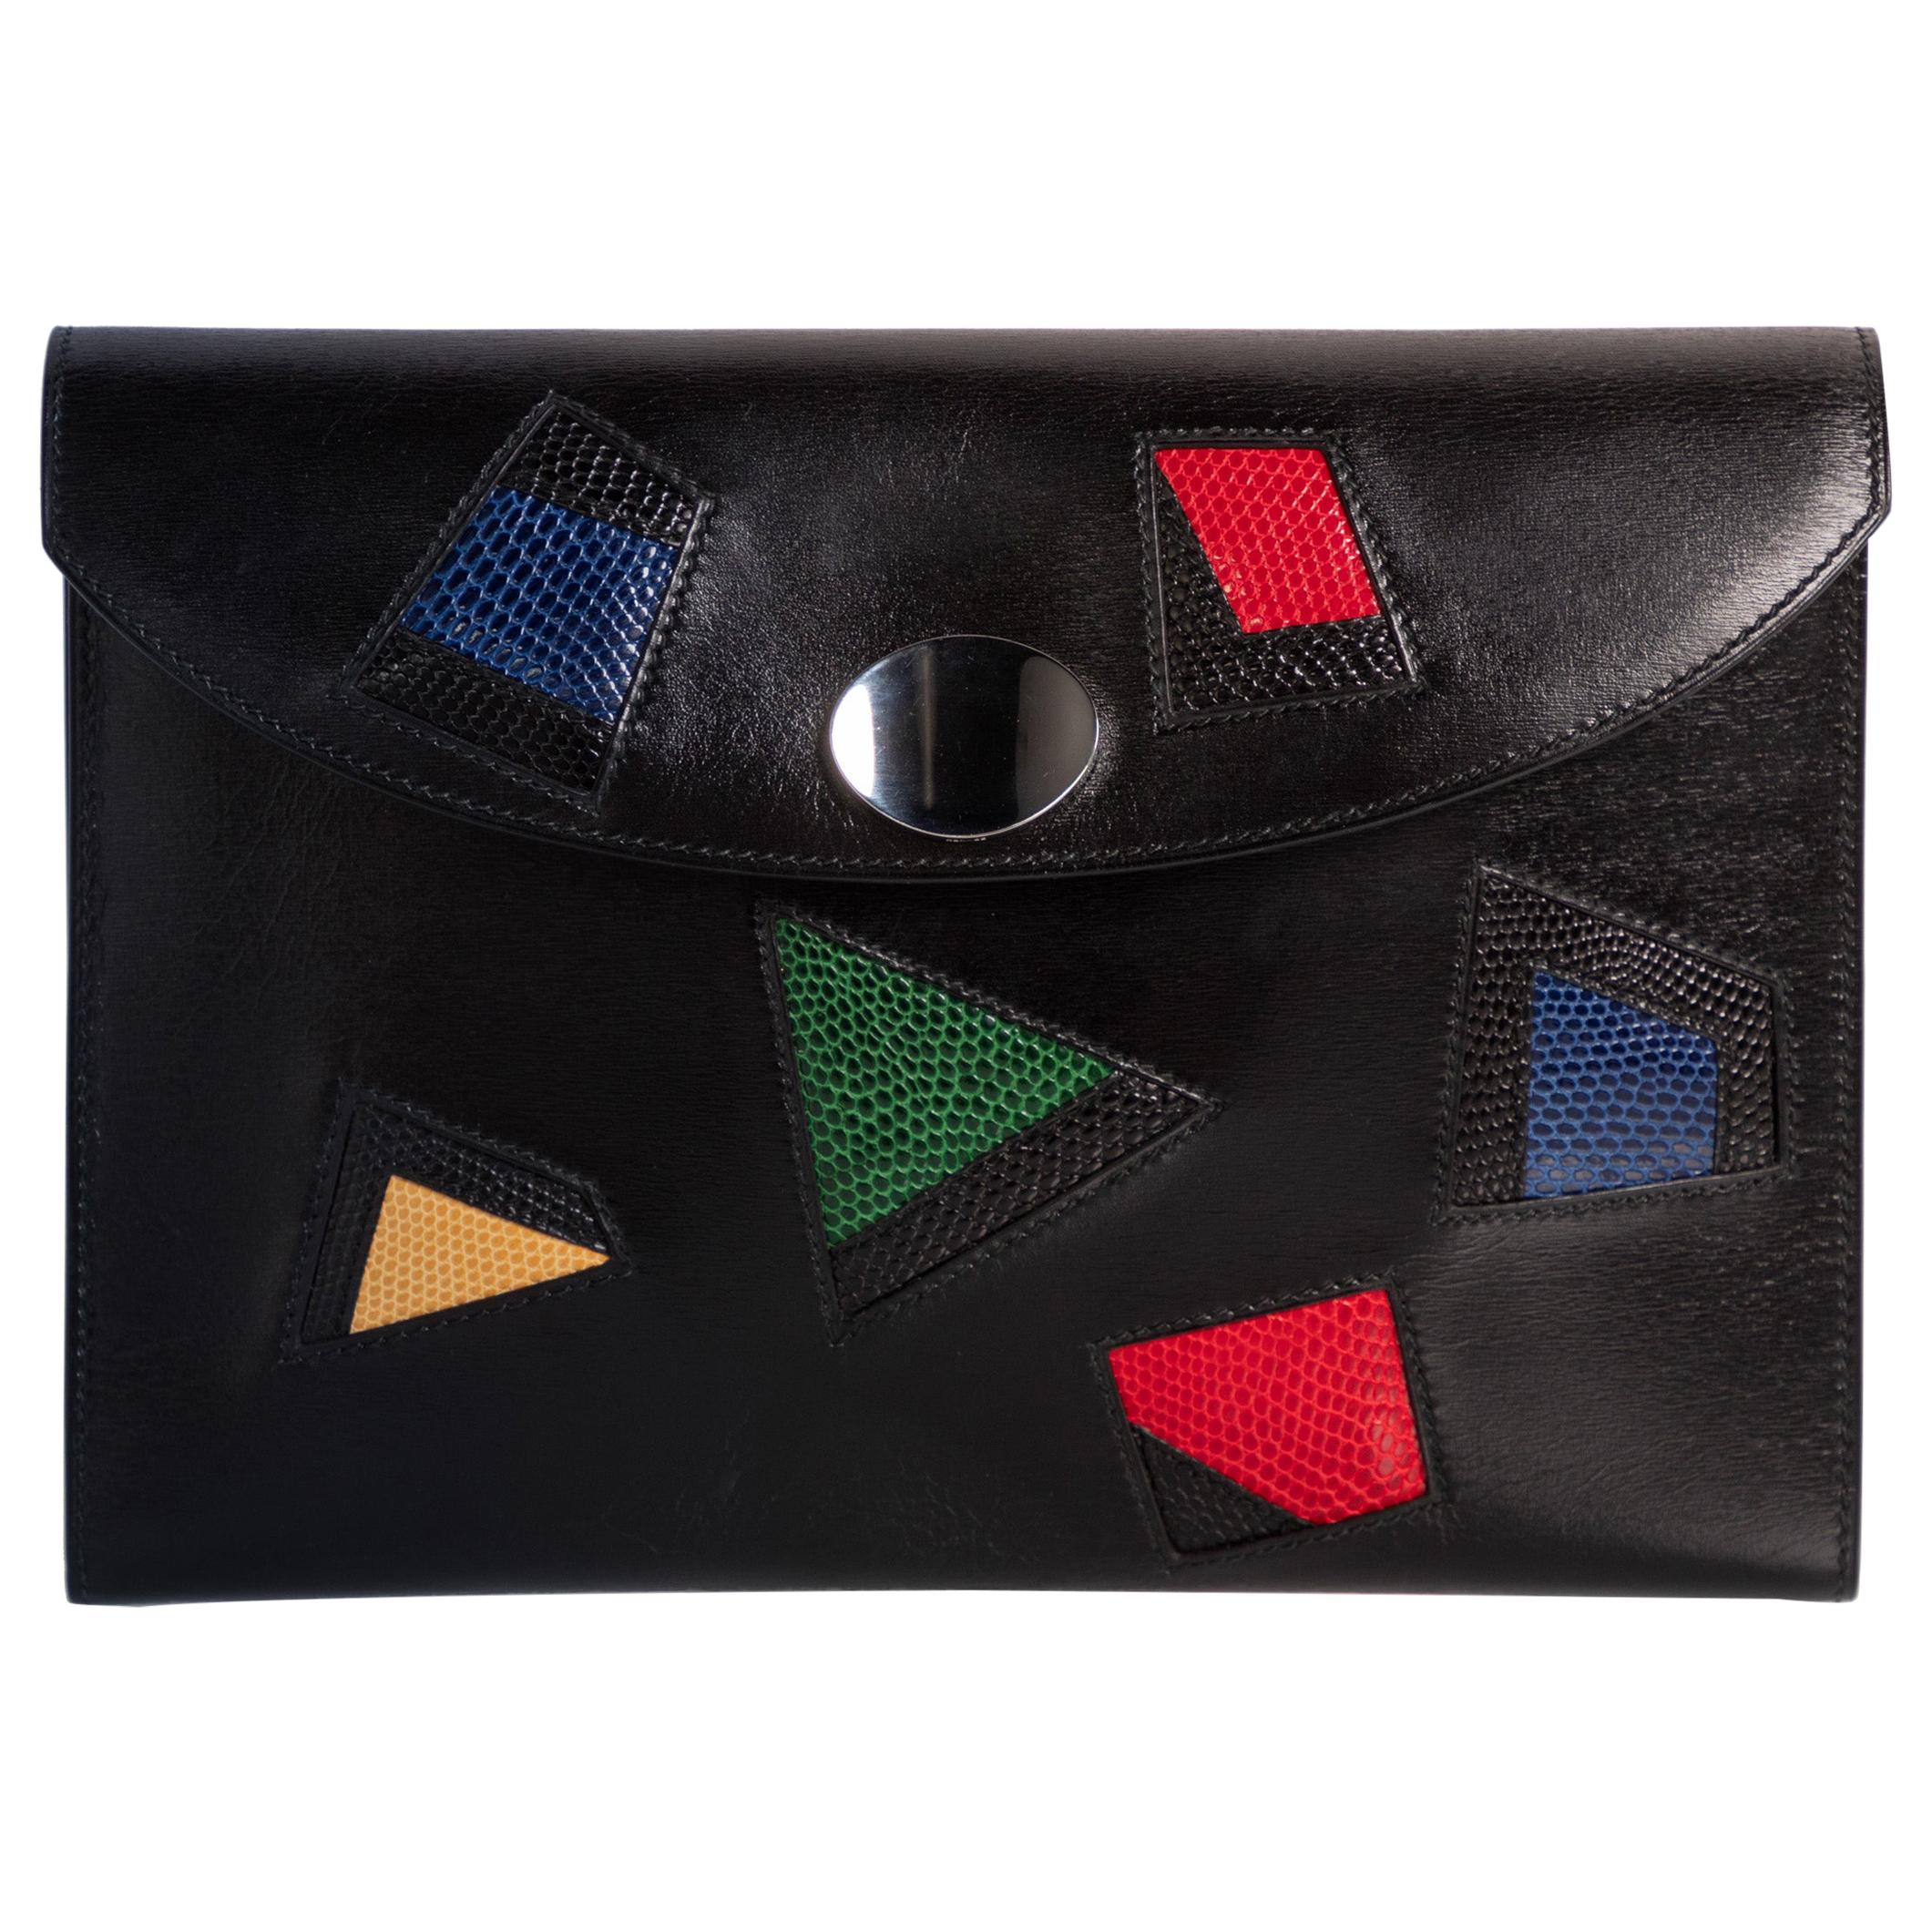 Hermes Black Leather Multicolored Lizard Clutch Rare, 1980s For Sale